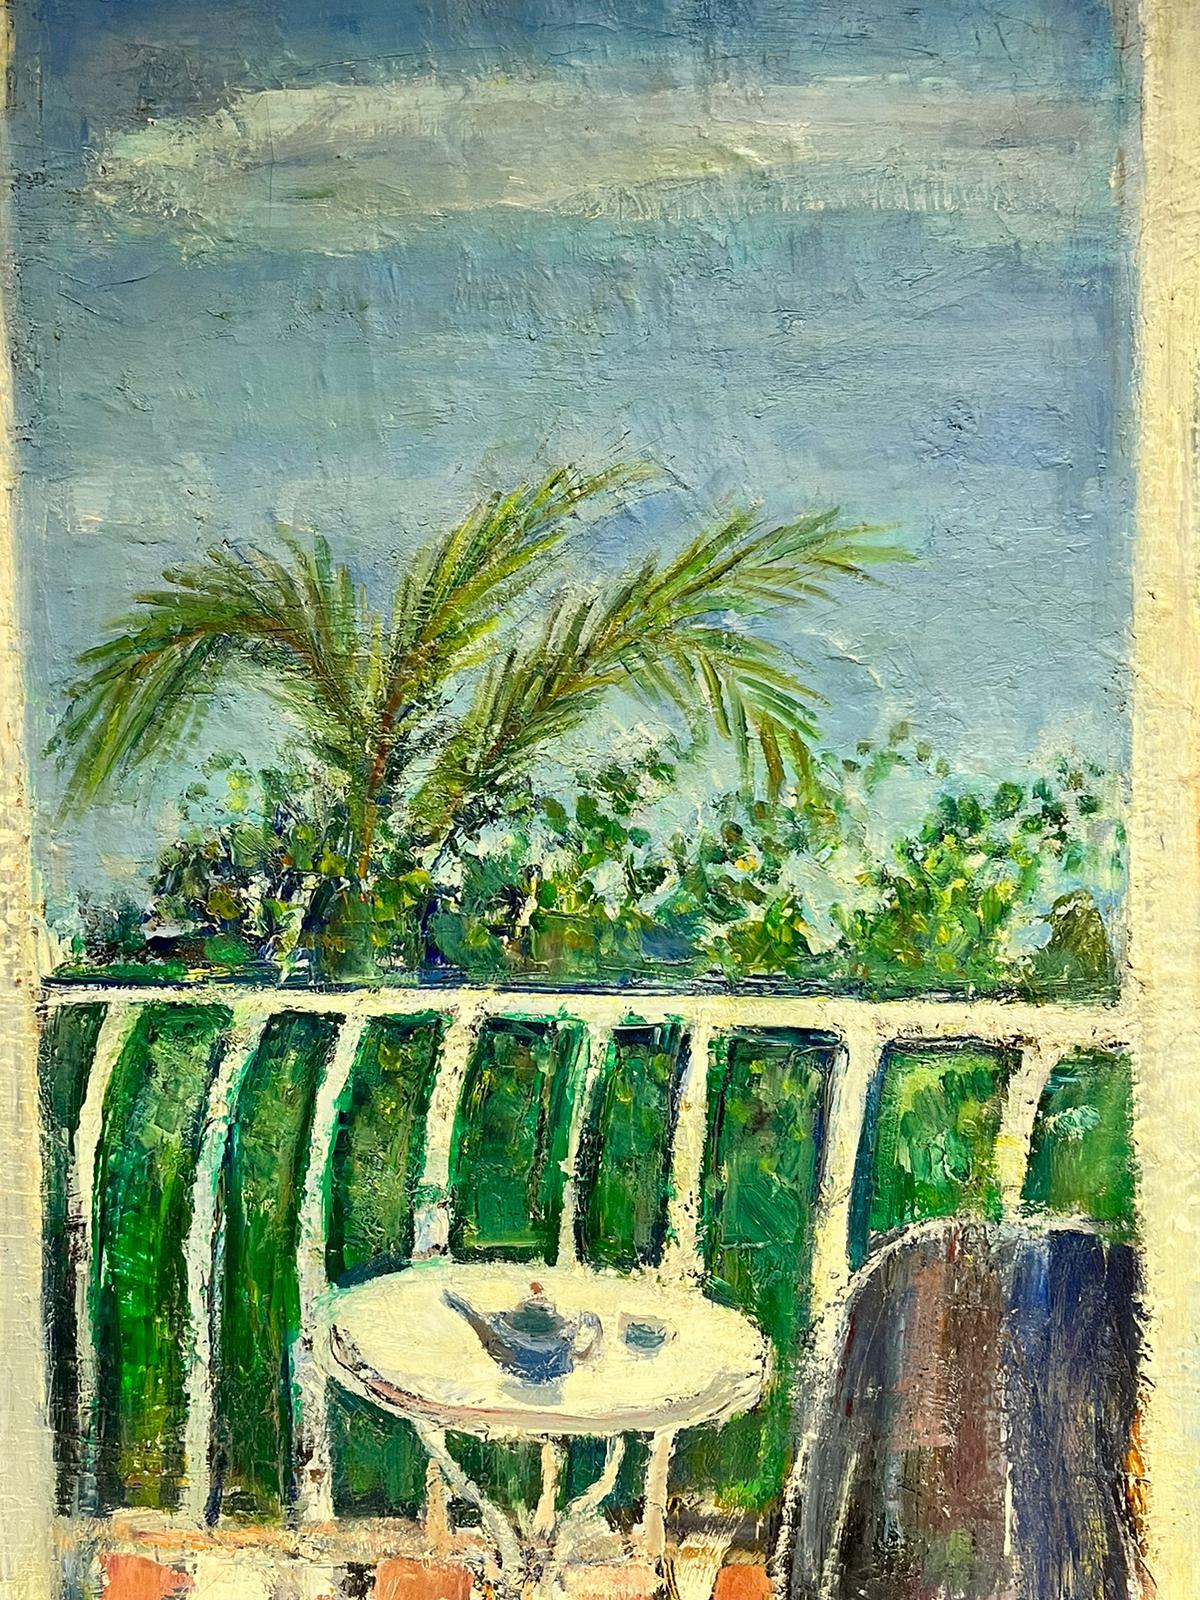 Original French Mid Century PostImpressionist Oil Green Balcony Med Terrace View - Post-Impressionist Painting by Édouard Righetti (1924-2001)